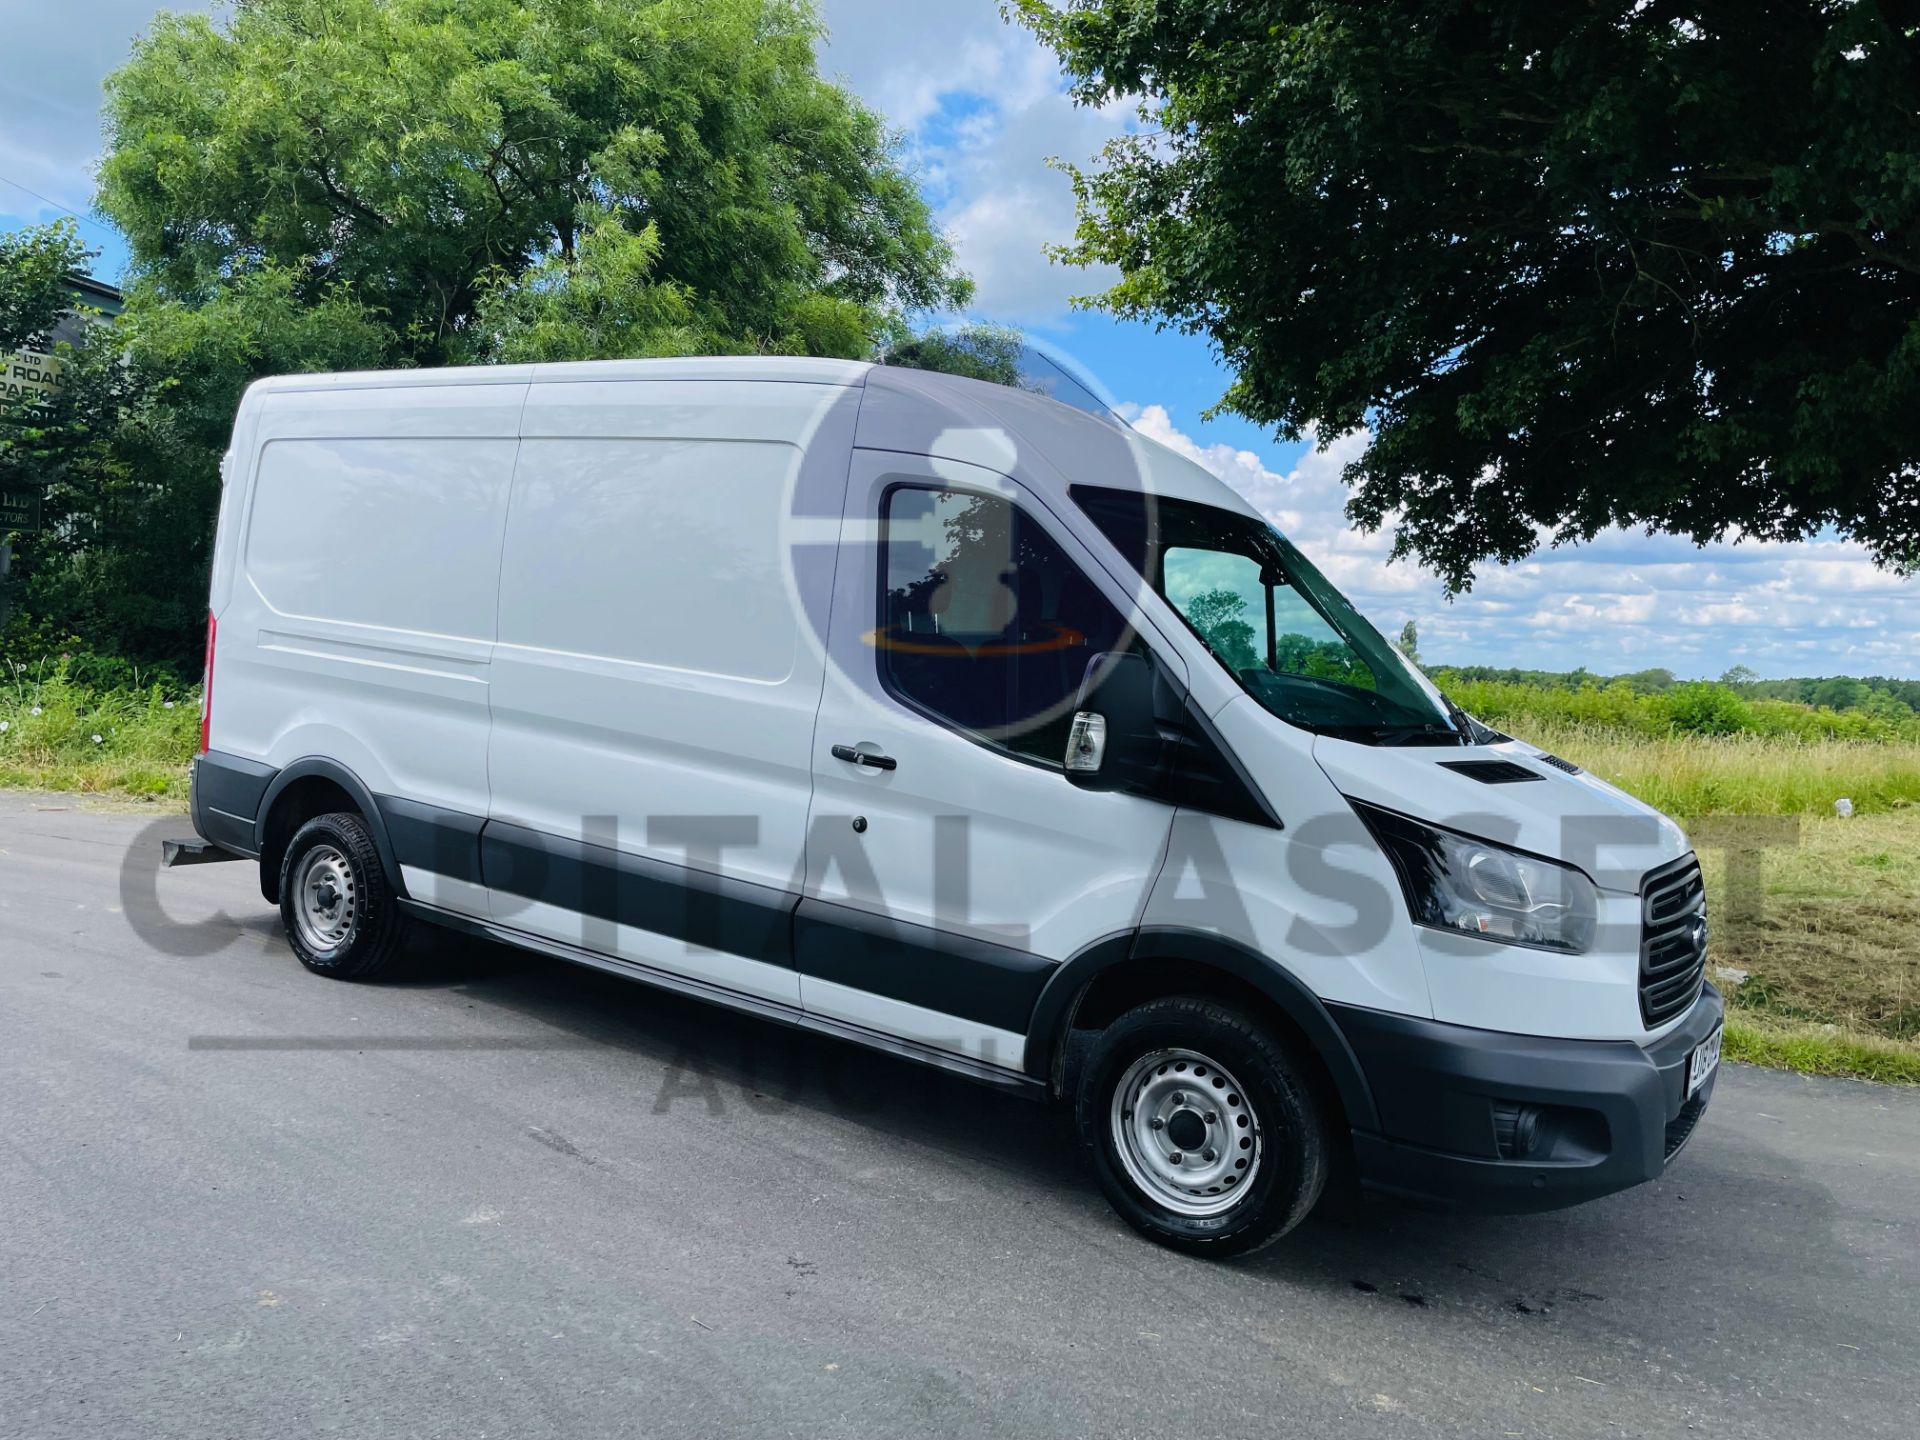 (On Sale) FORD TRANSIT *PANEL VAN* (2018 - EURO 6) 2.0 TDCI 'ECOBLUE' (1 OWNER) *AIR CON & NAV* - Image 2 of 43